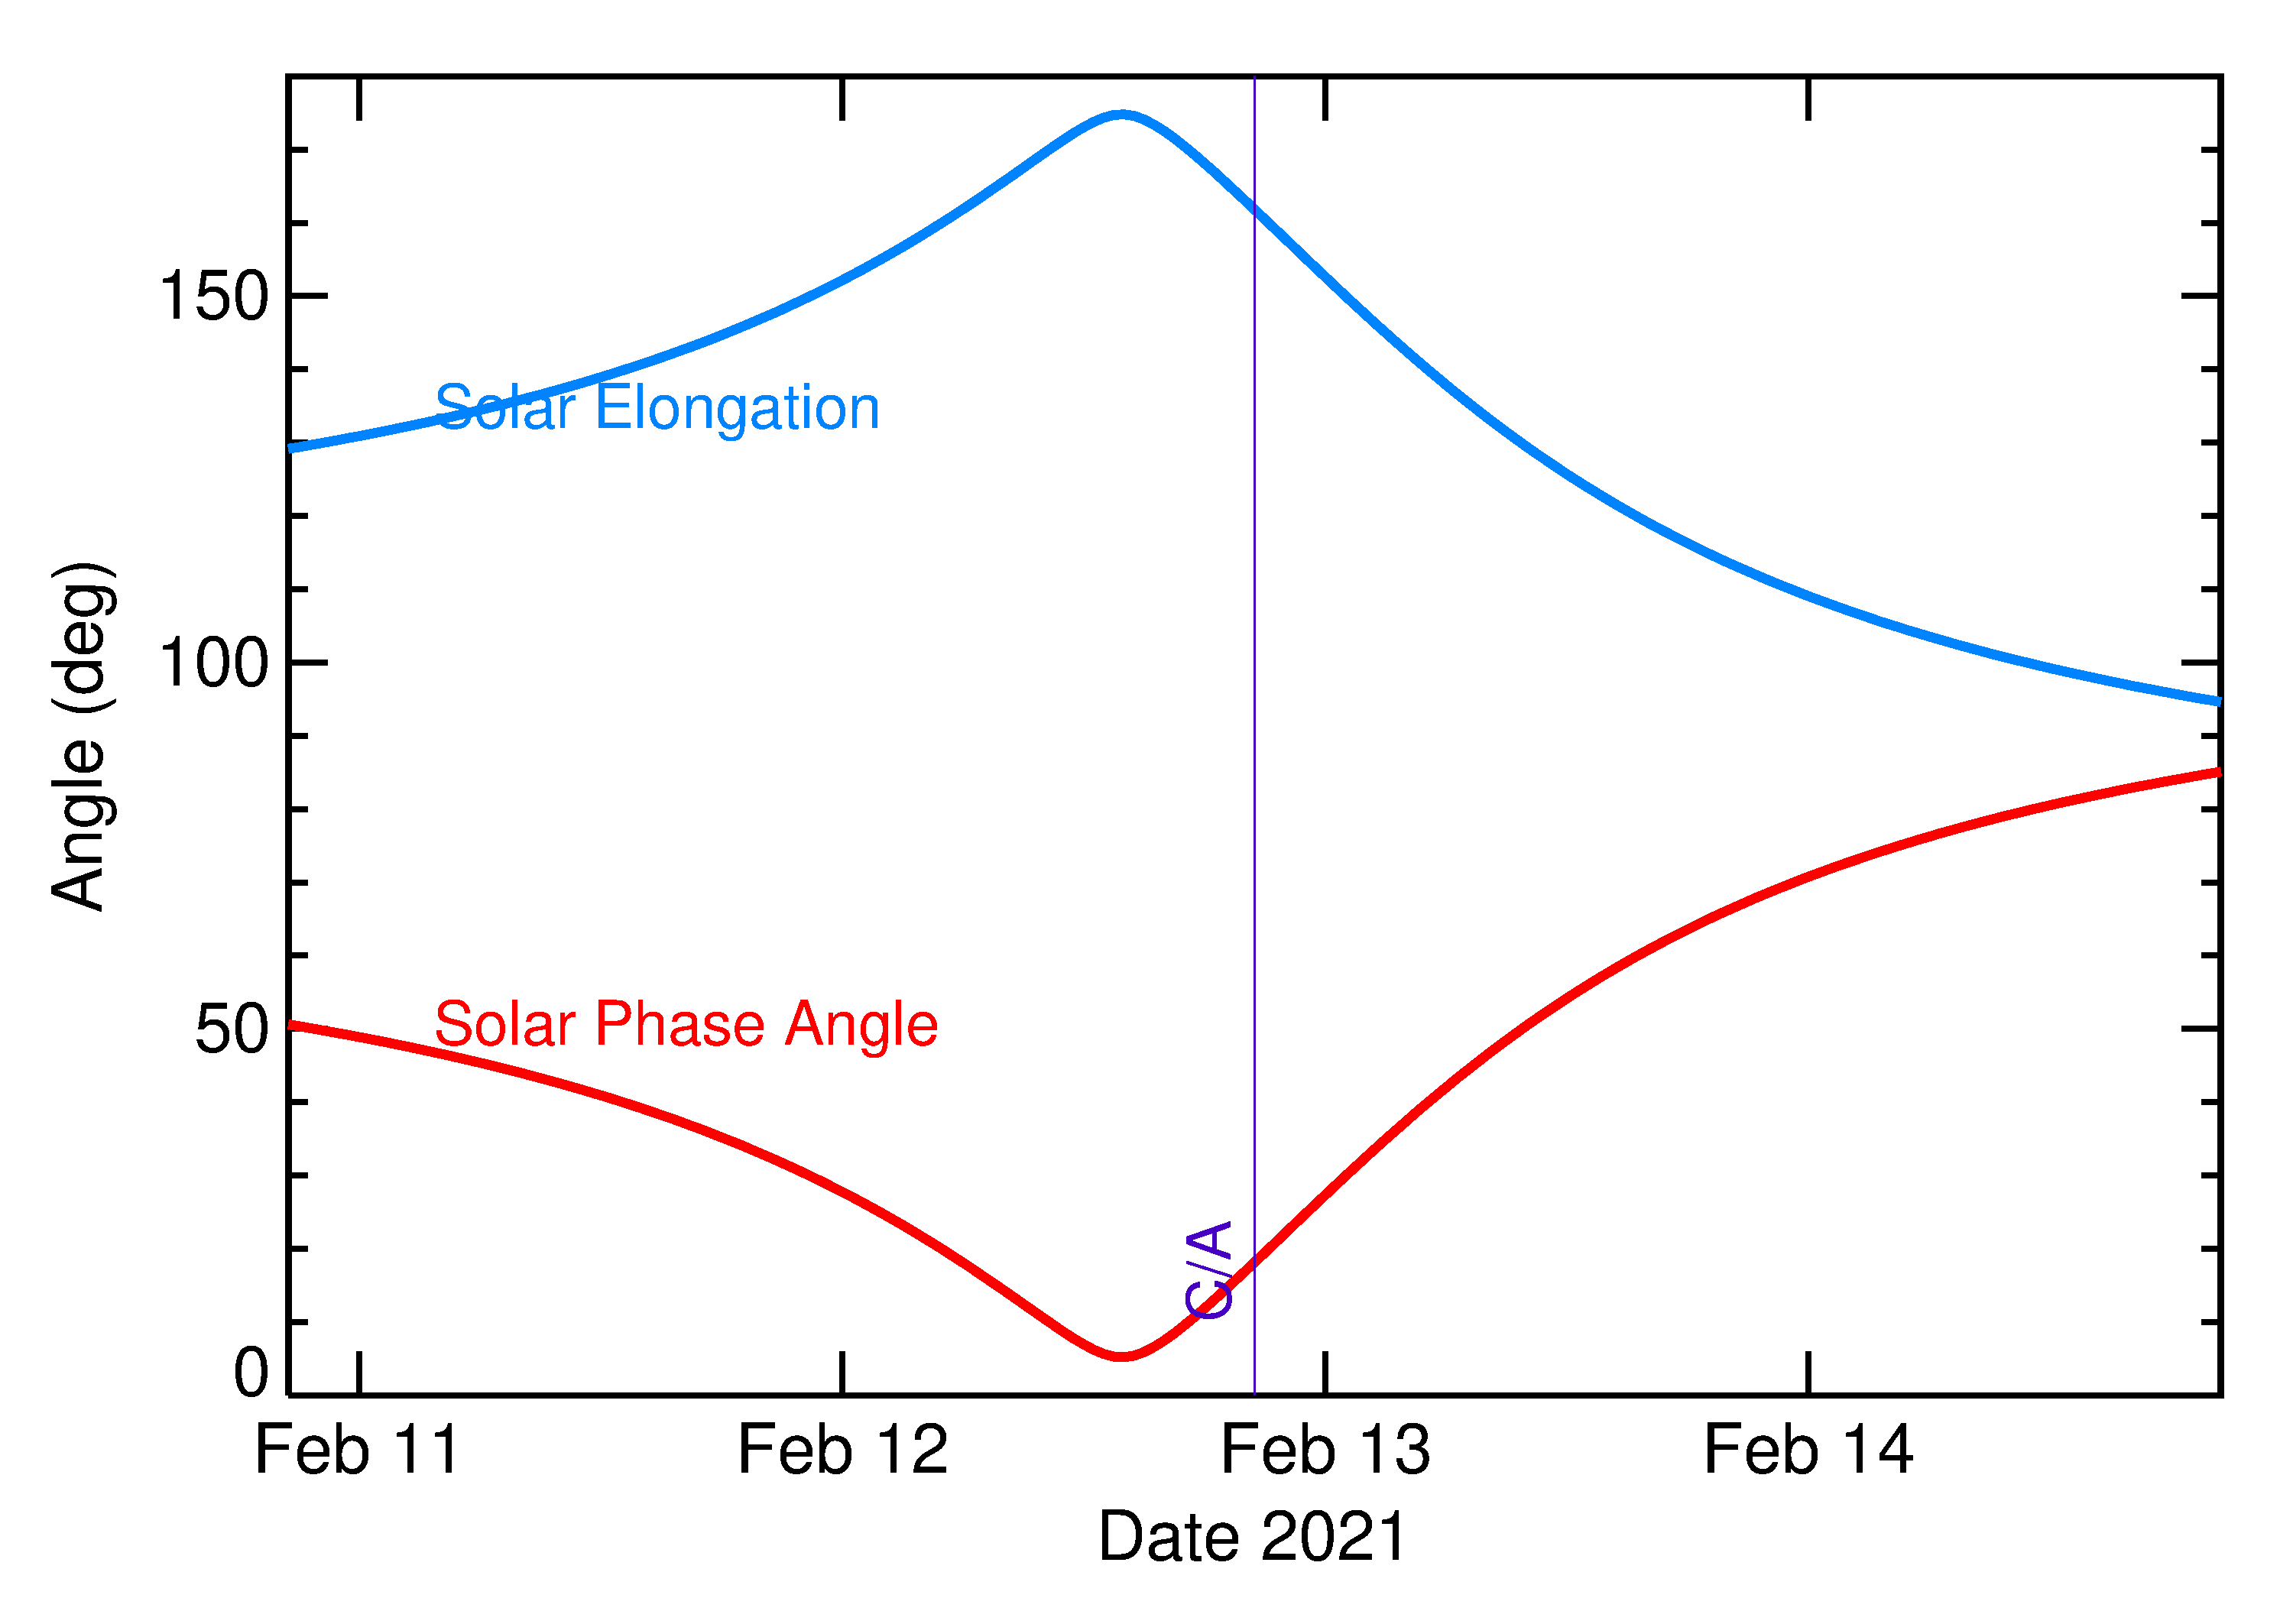 Solar Elongation and Solar Phase Angle of 2021 CC7 in the days around closest approach